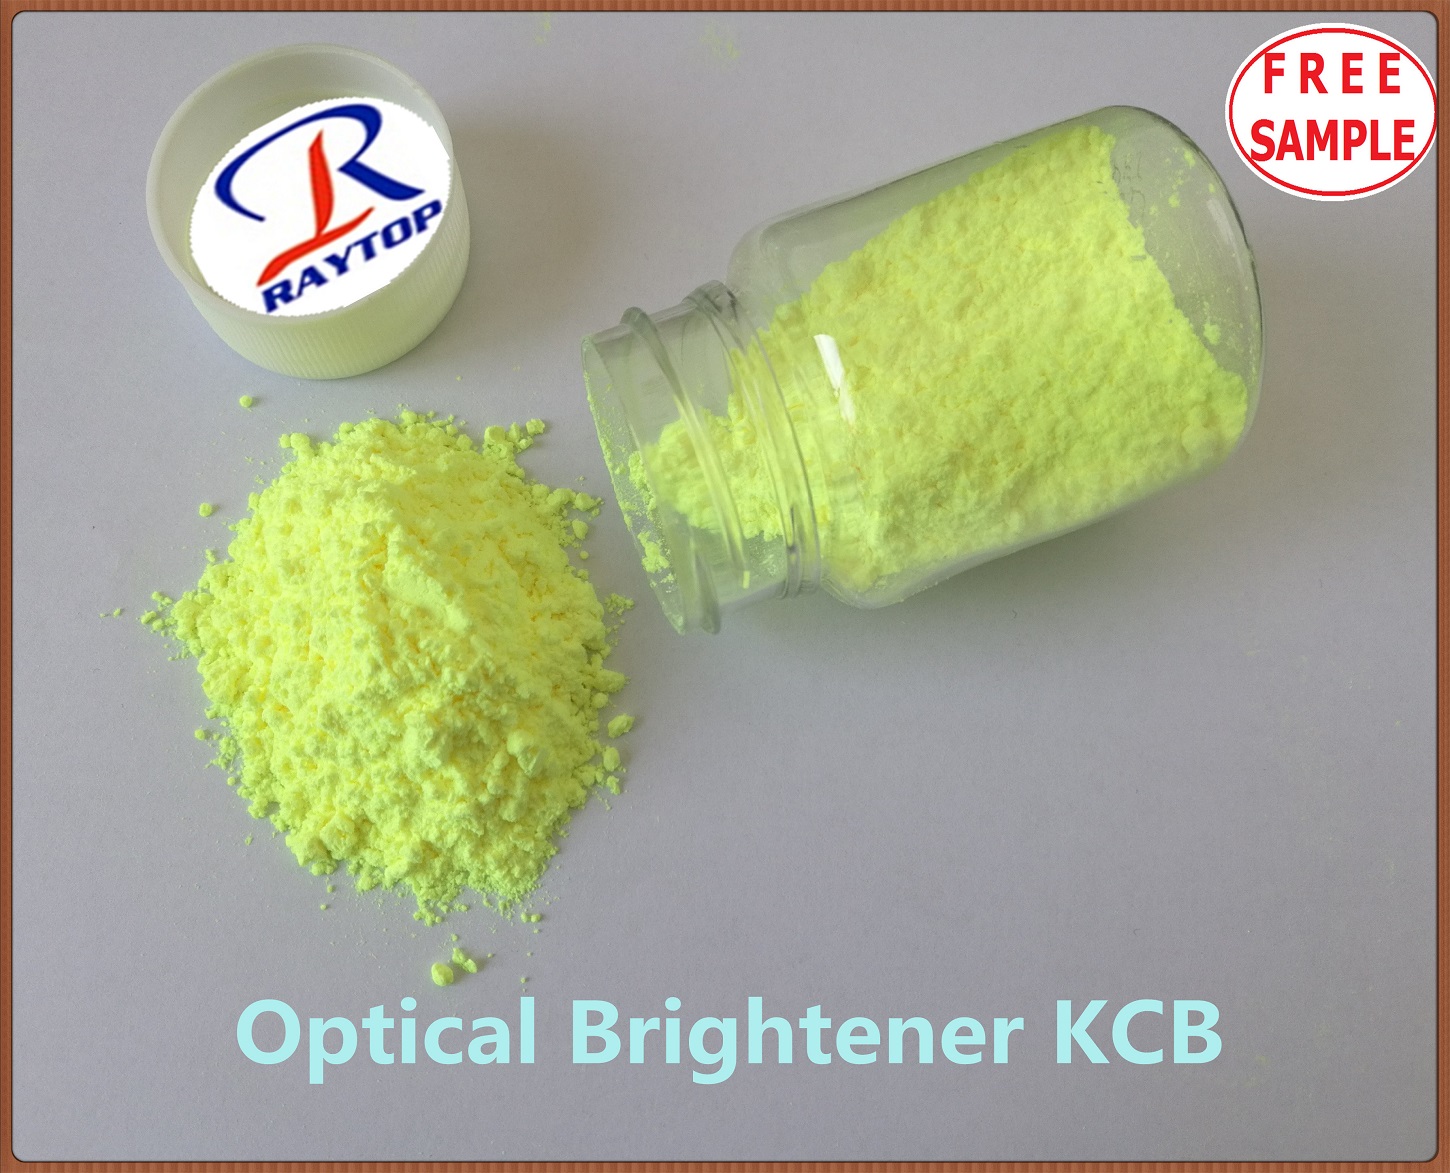 Why Optical Brighteners KCB is the first choice for EVA foam?